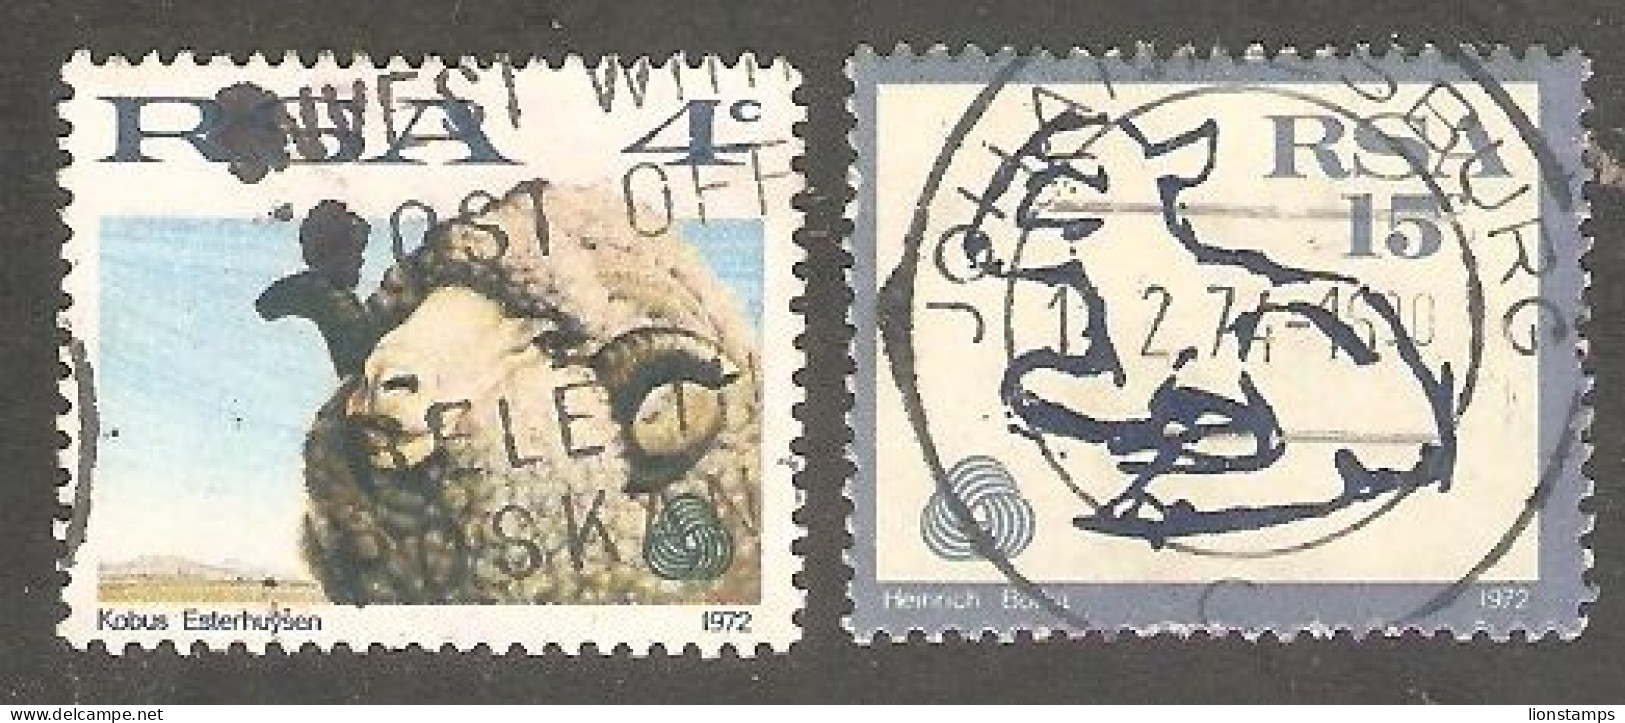 South Africa - Scott 371-372 - Used Stamps